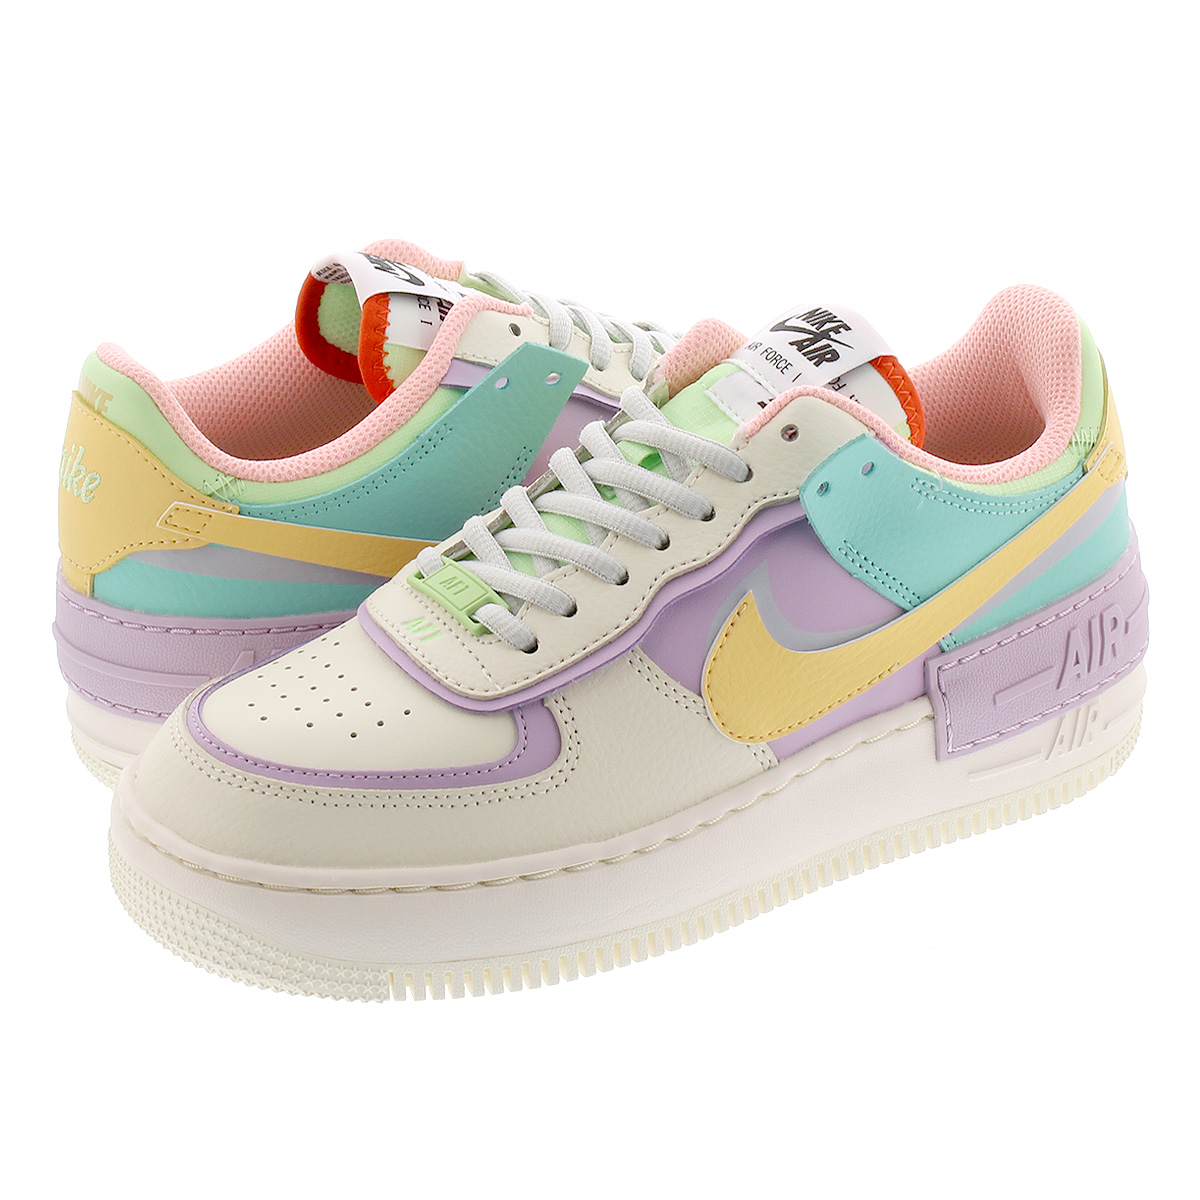 nike af1 shadow air force 1 pale ivory gold purple wmns